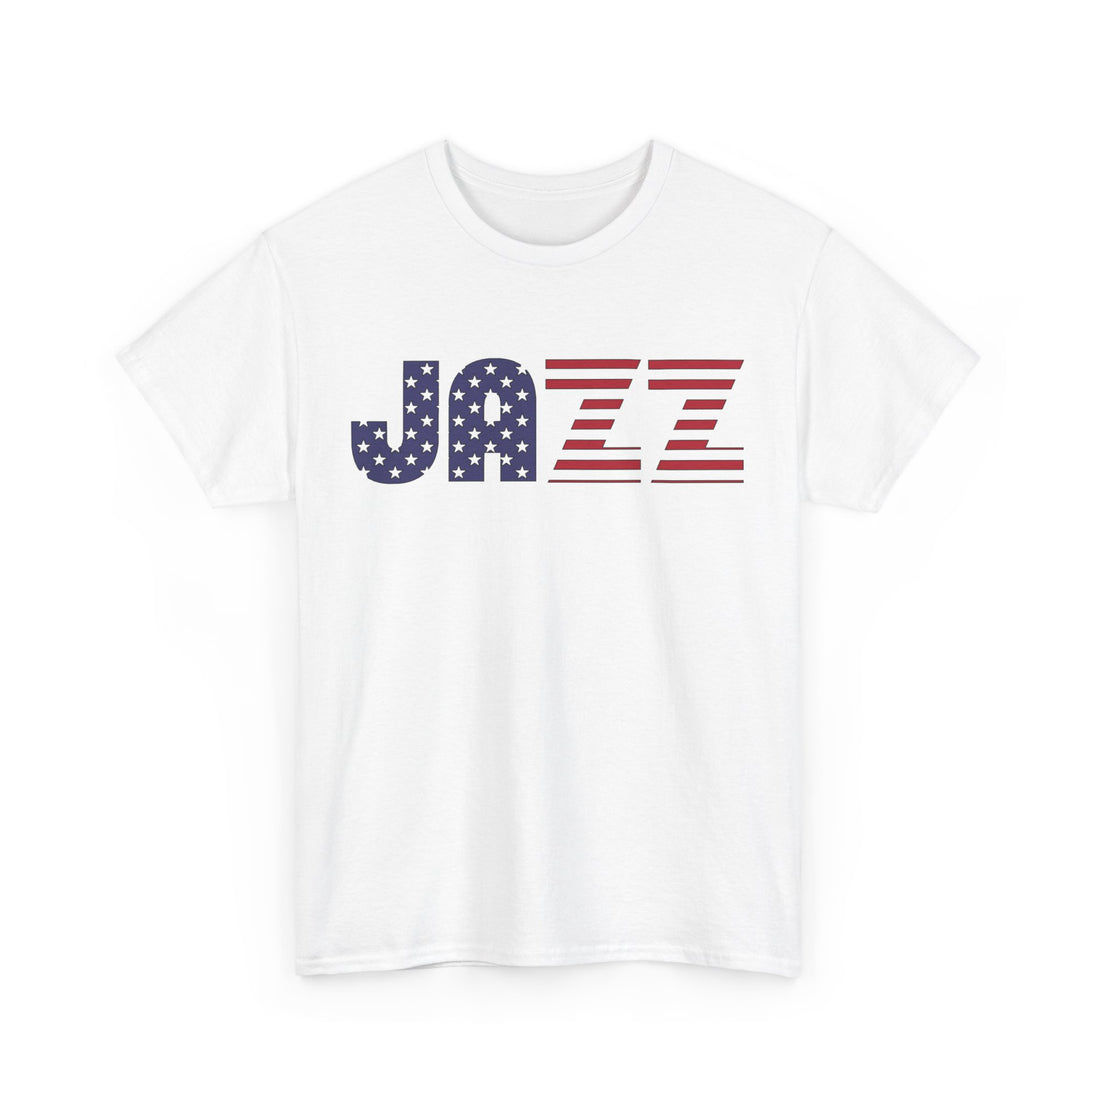 A white t shirt with an American flag imbedded into the word ’JAZZ’ 